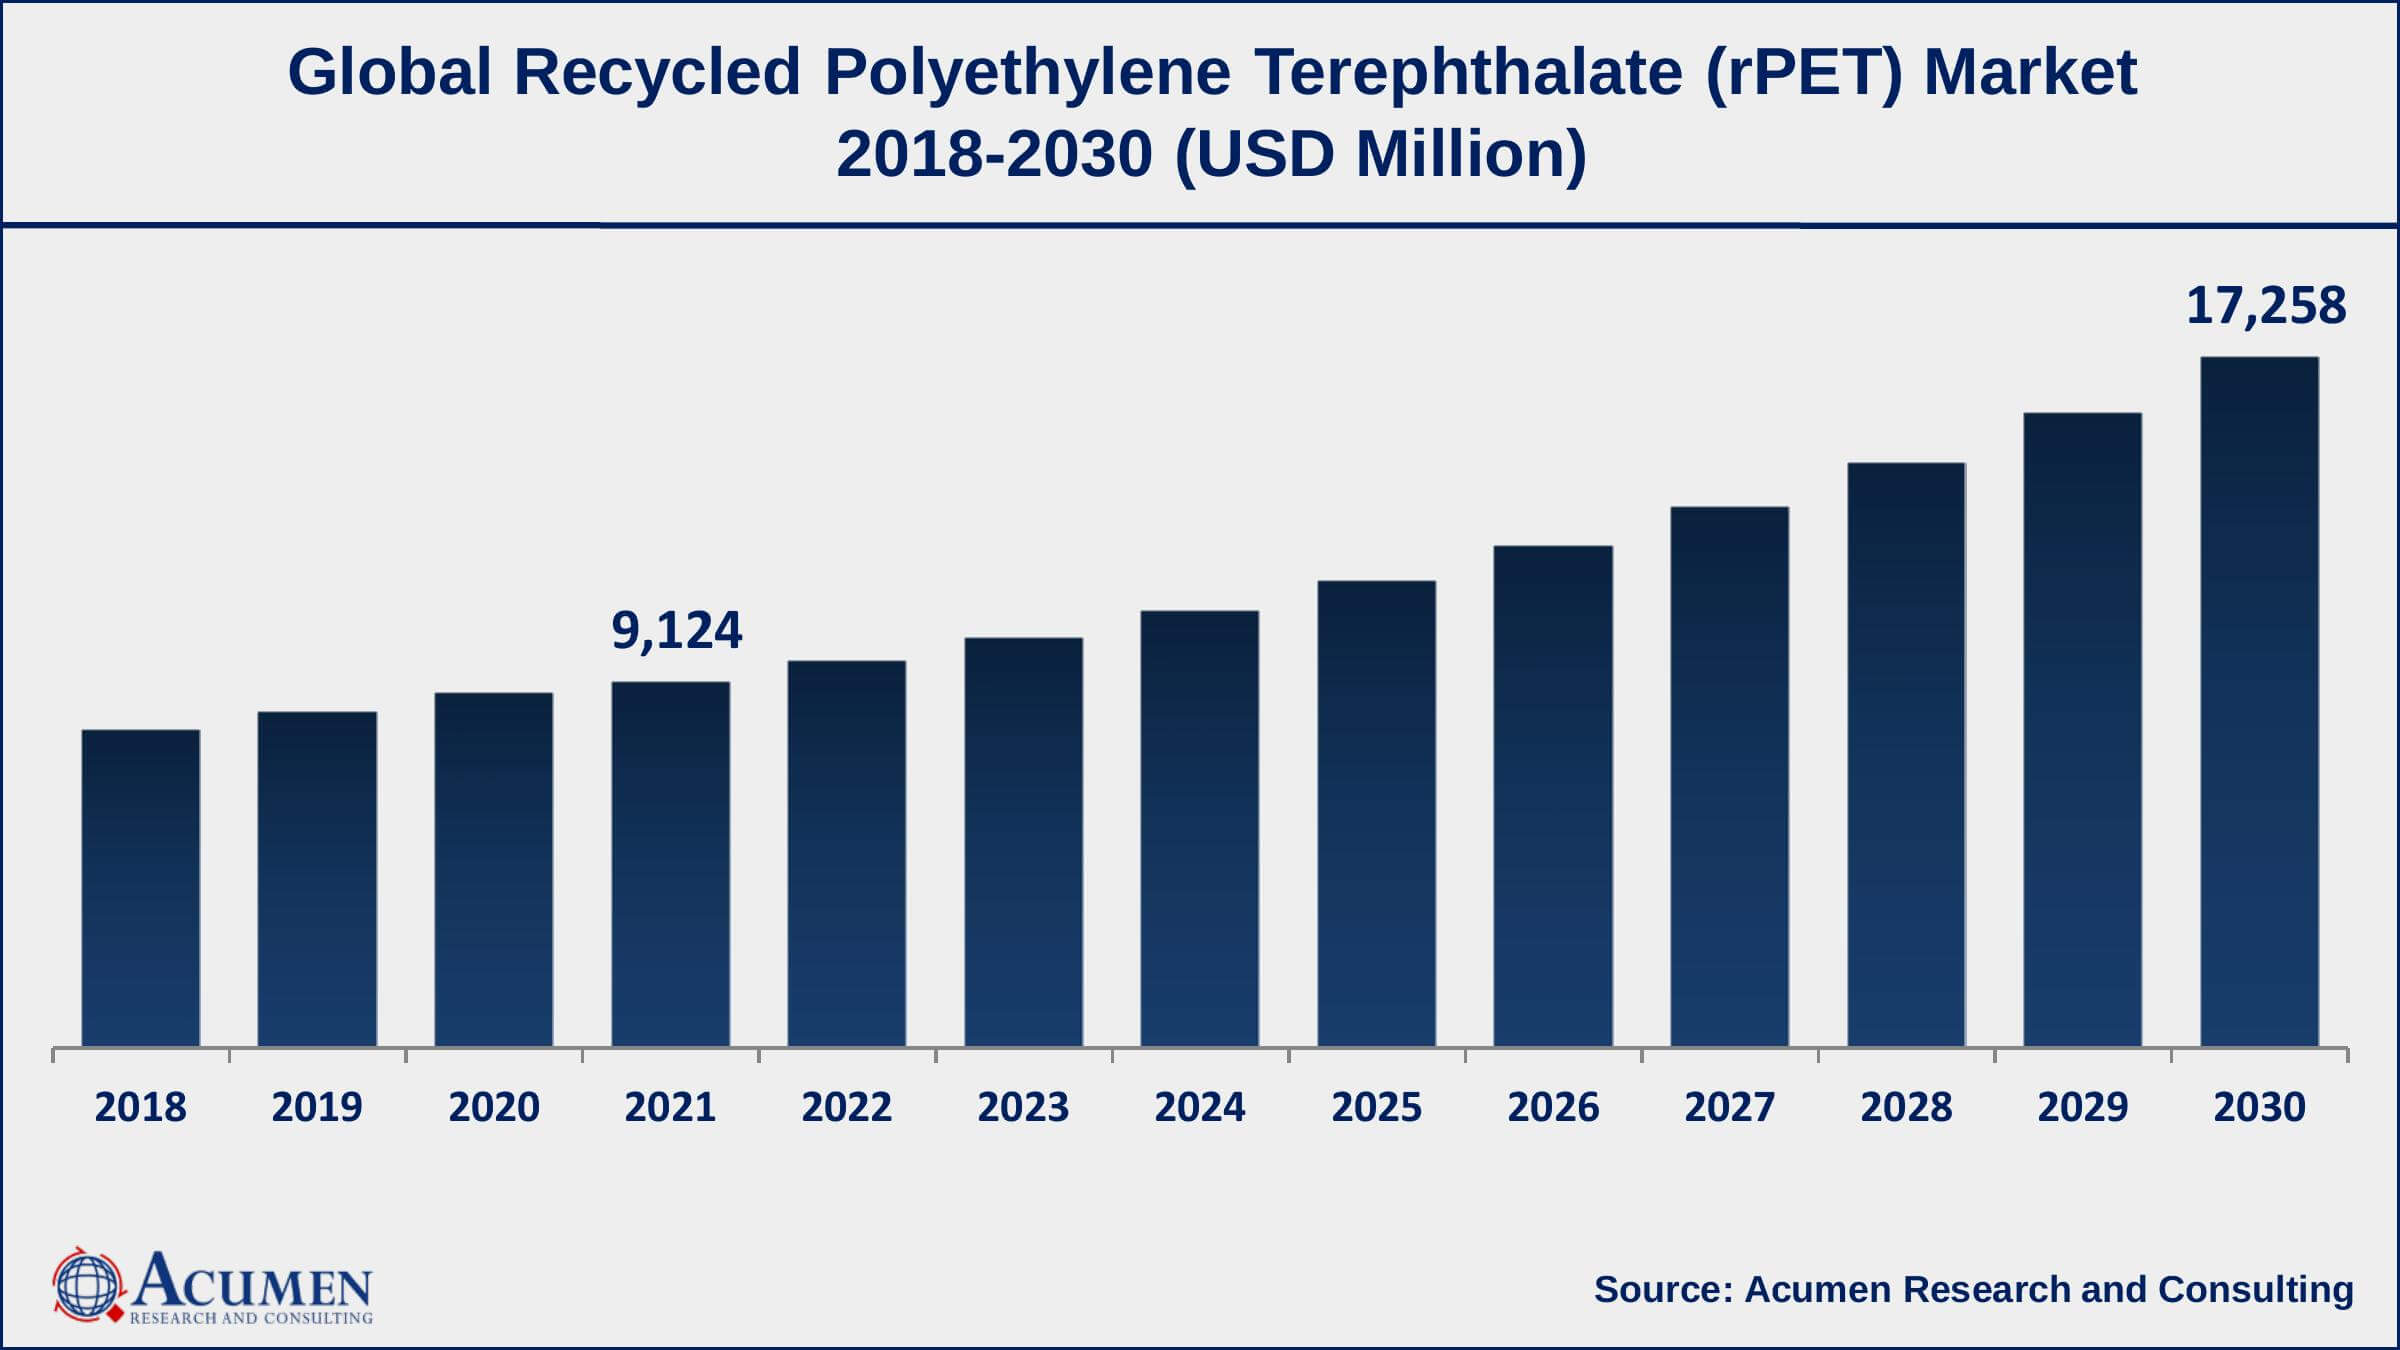 Europe recycled polyethylene terephthalate (rPET) market growth will observe highest CAGR from 2022 to 2030